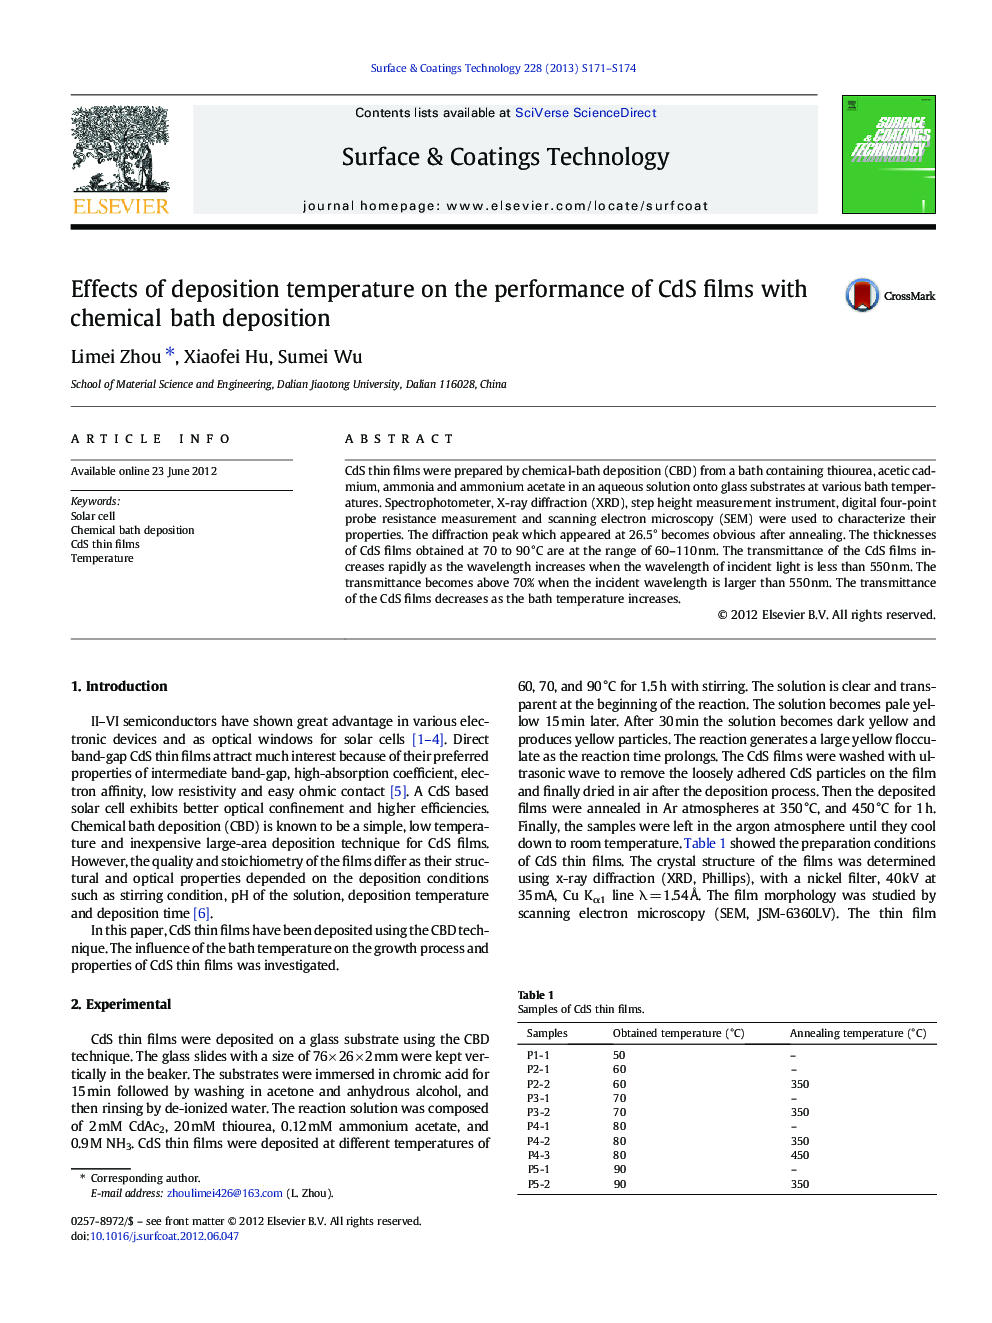 Effects of deposition temperature on the performance of CdS films with chemical bath deposition